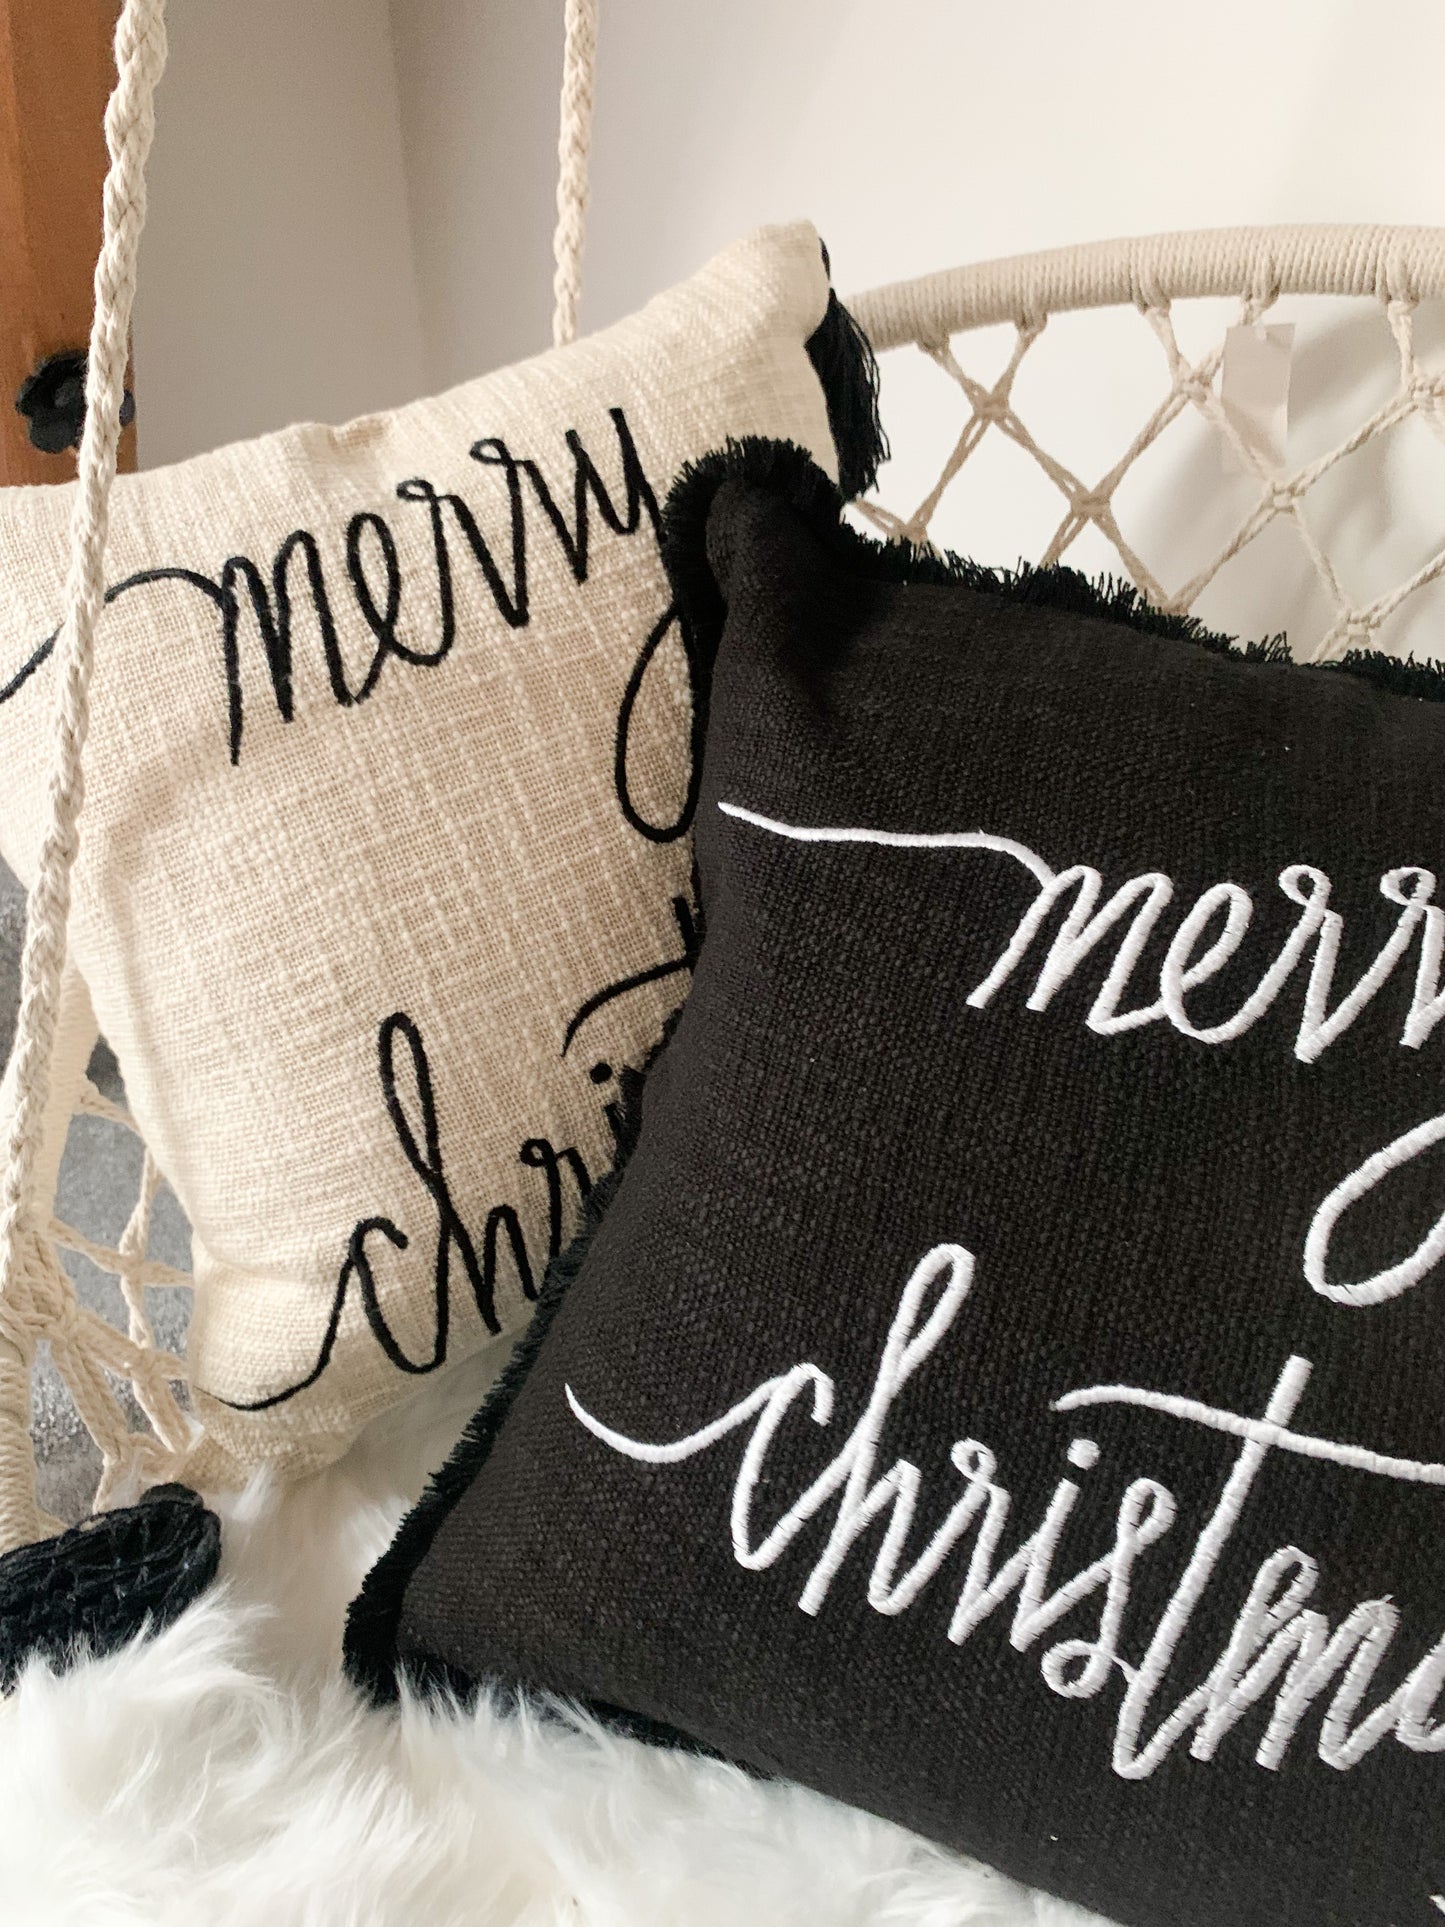 Beige and Black Merry Christmas Cushion Cover